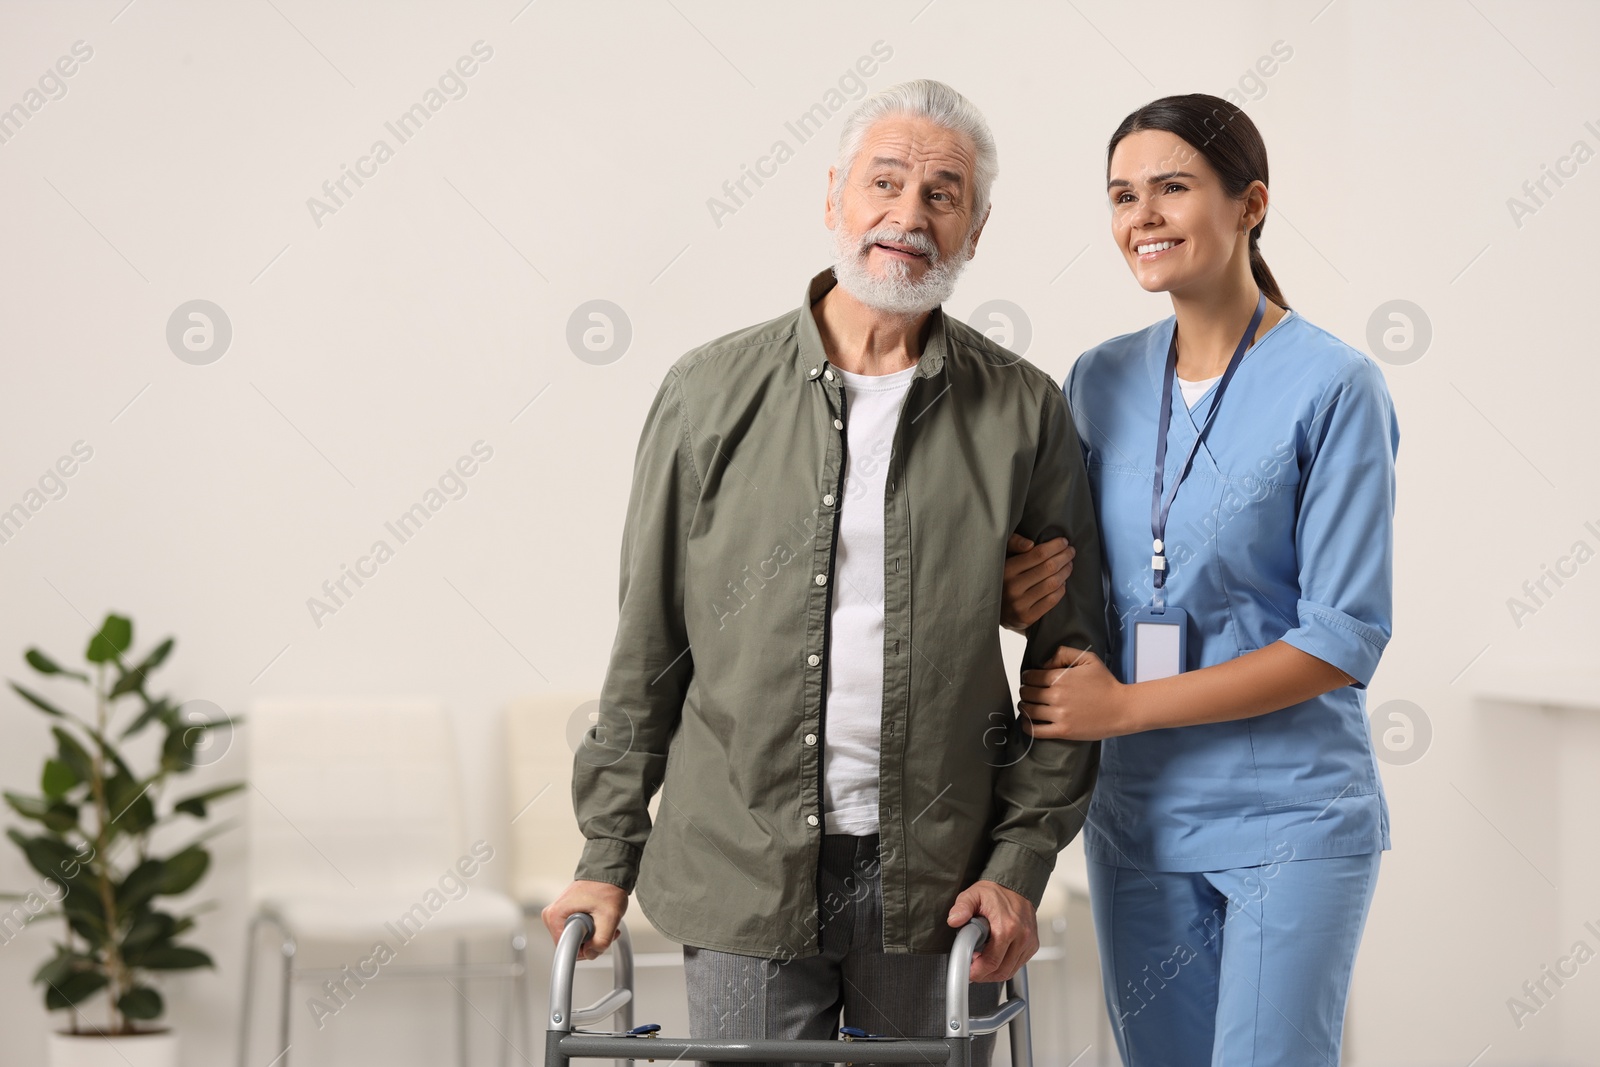 Photo of Smiling nurse supporting elderly patient in hospital, space for text